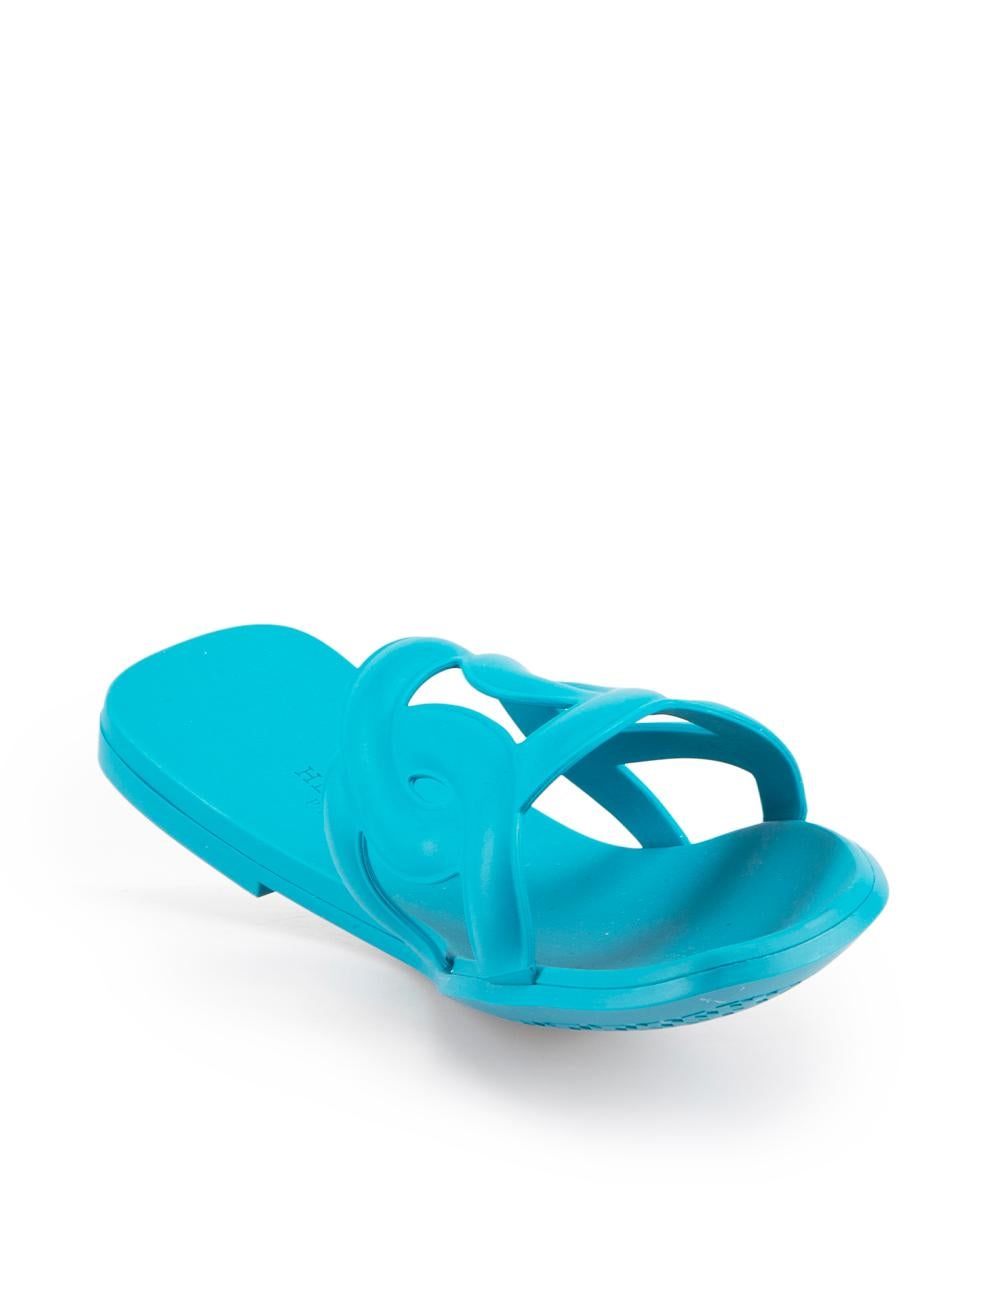 CONDITION is Never worn. No visible wear to sandals is evident on this new Hermès designer resale item. Sandals are misshapen due to poor storage.
 
 Details
 Aloha model
 Teal
 Rubber
 Slide sandals
 Open toe
 Flat heel
 
 
 Made in Italy
 
